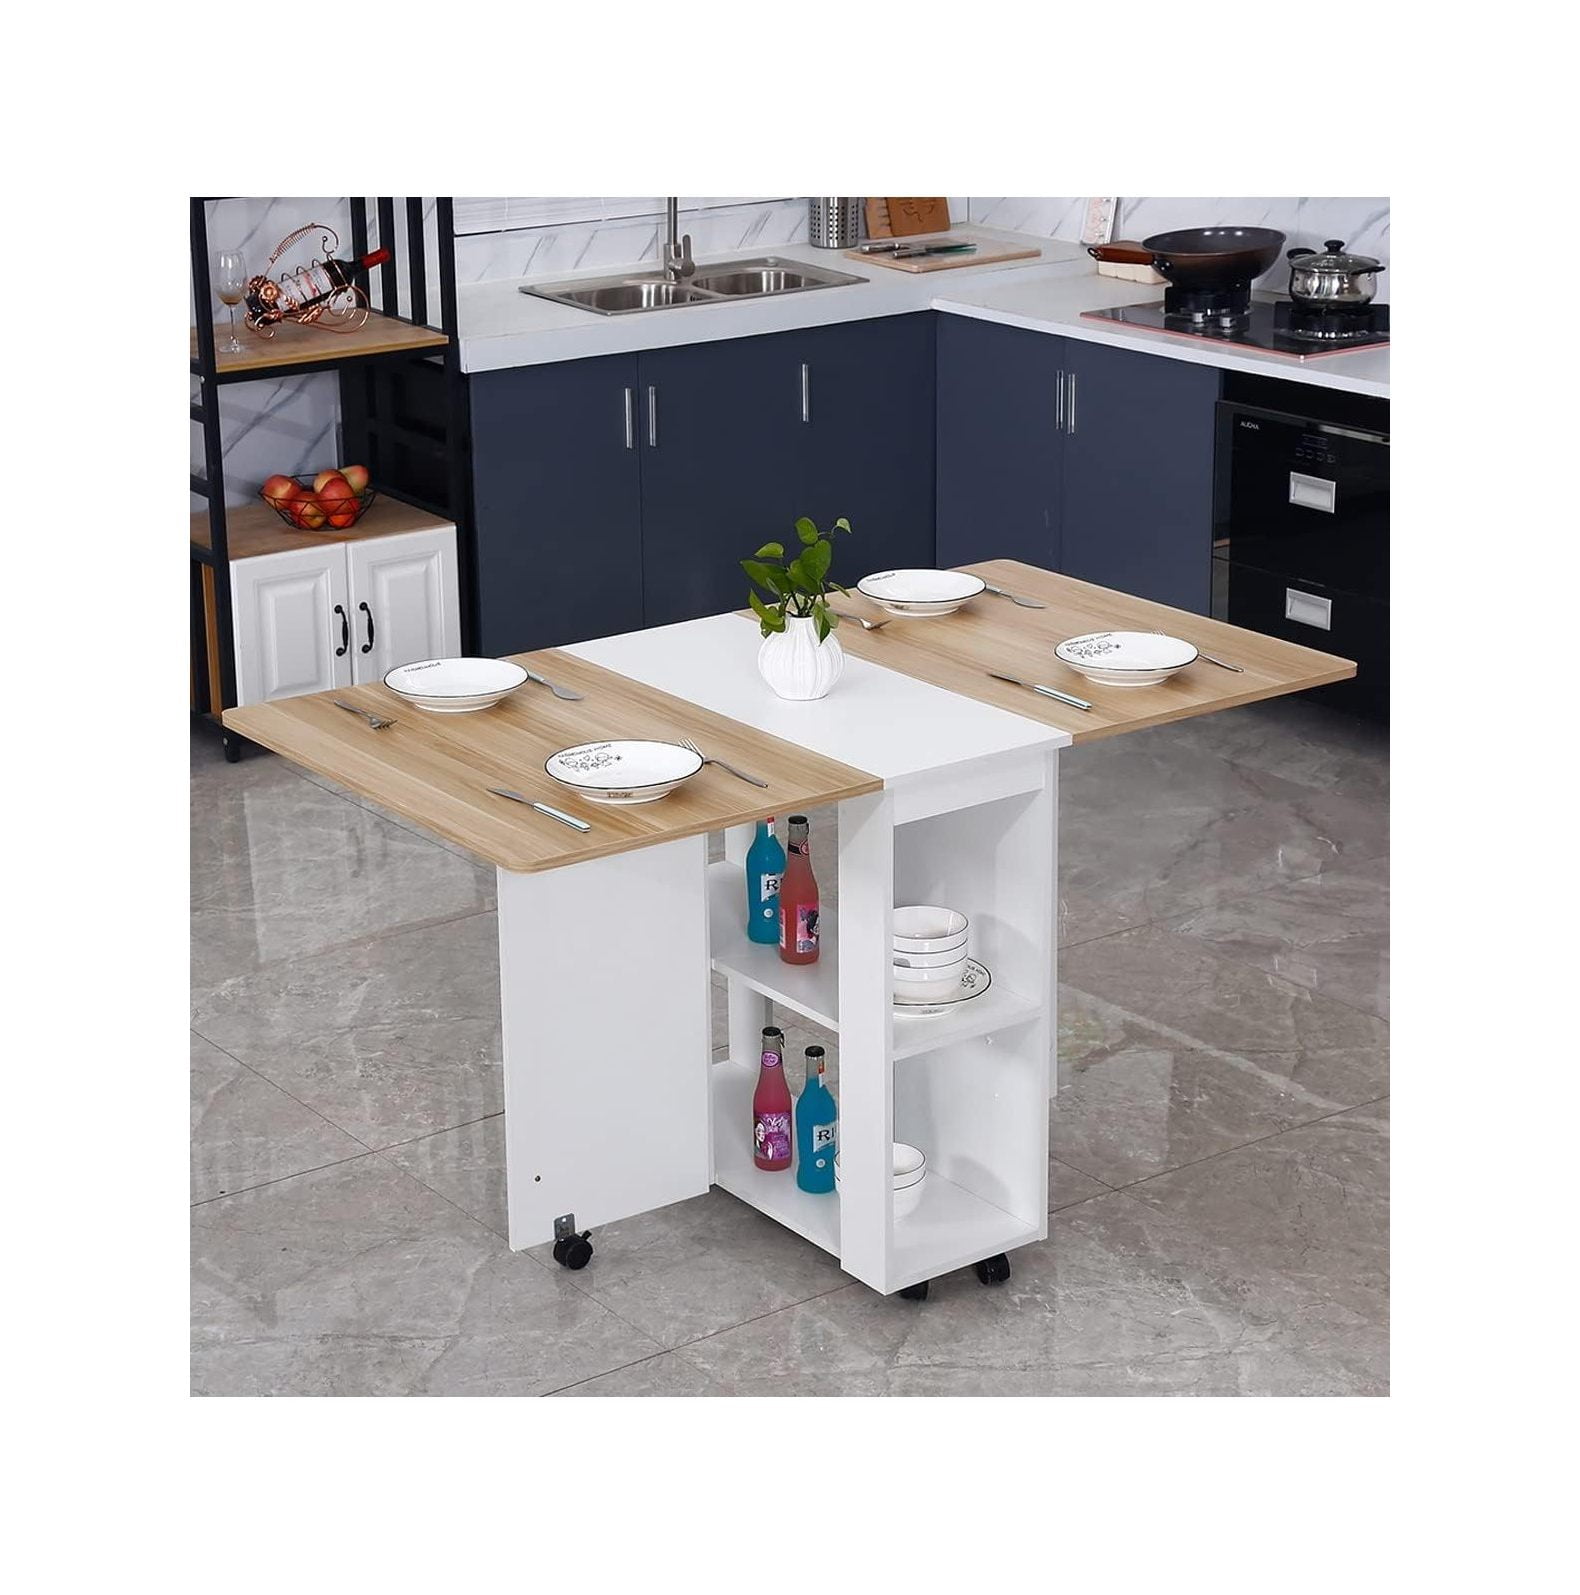 GnHoCh Folding Dining Table Drop Leaf Kitchen Table for Small Spaces ...